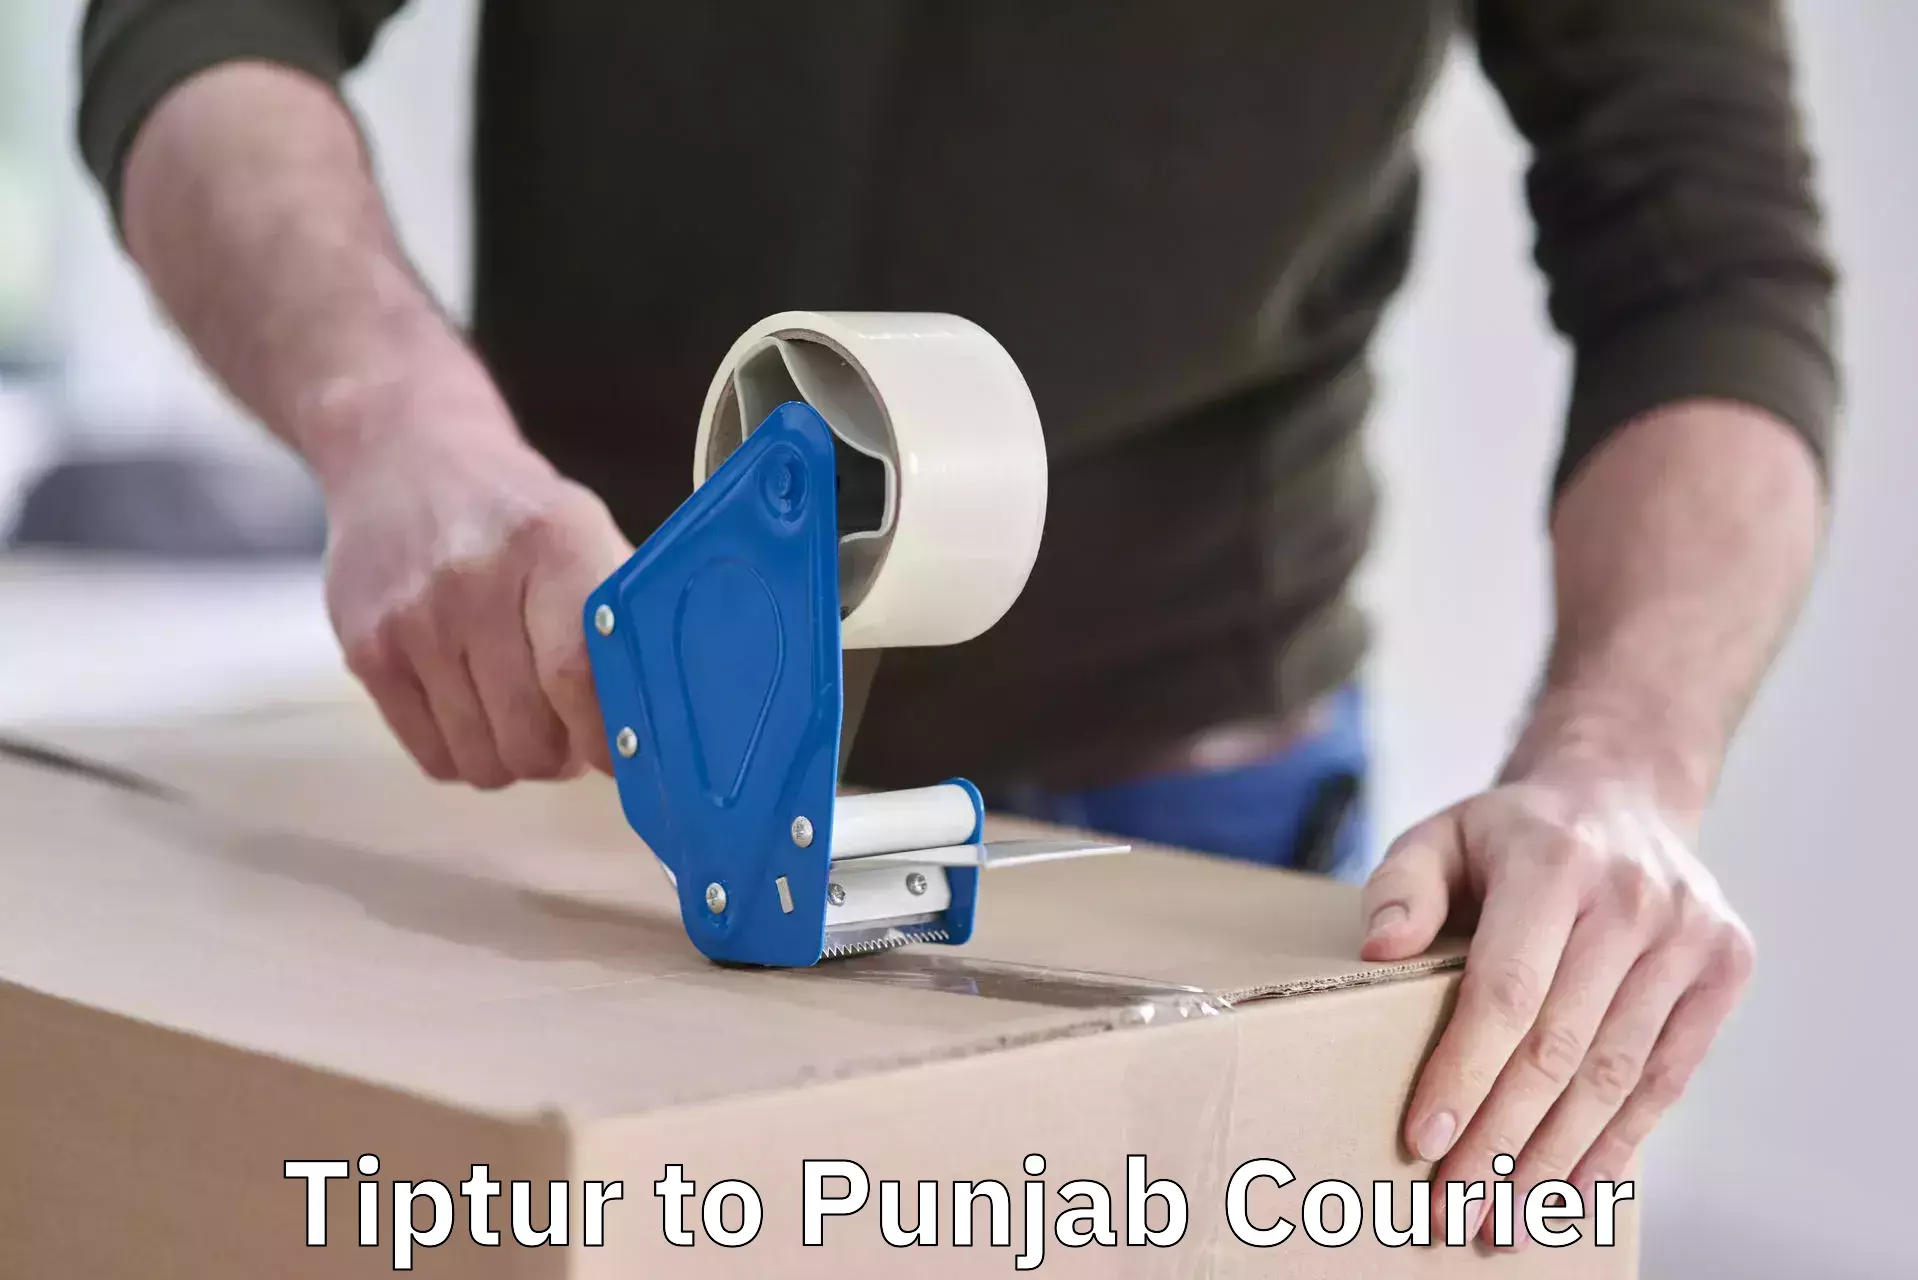 Nationwide luggage courier Tiptur to Punjab